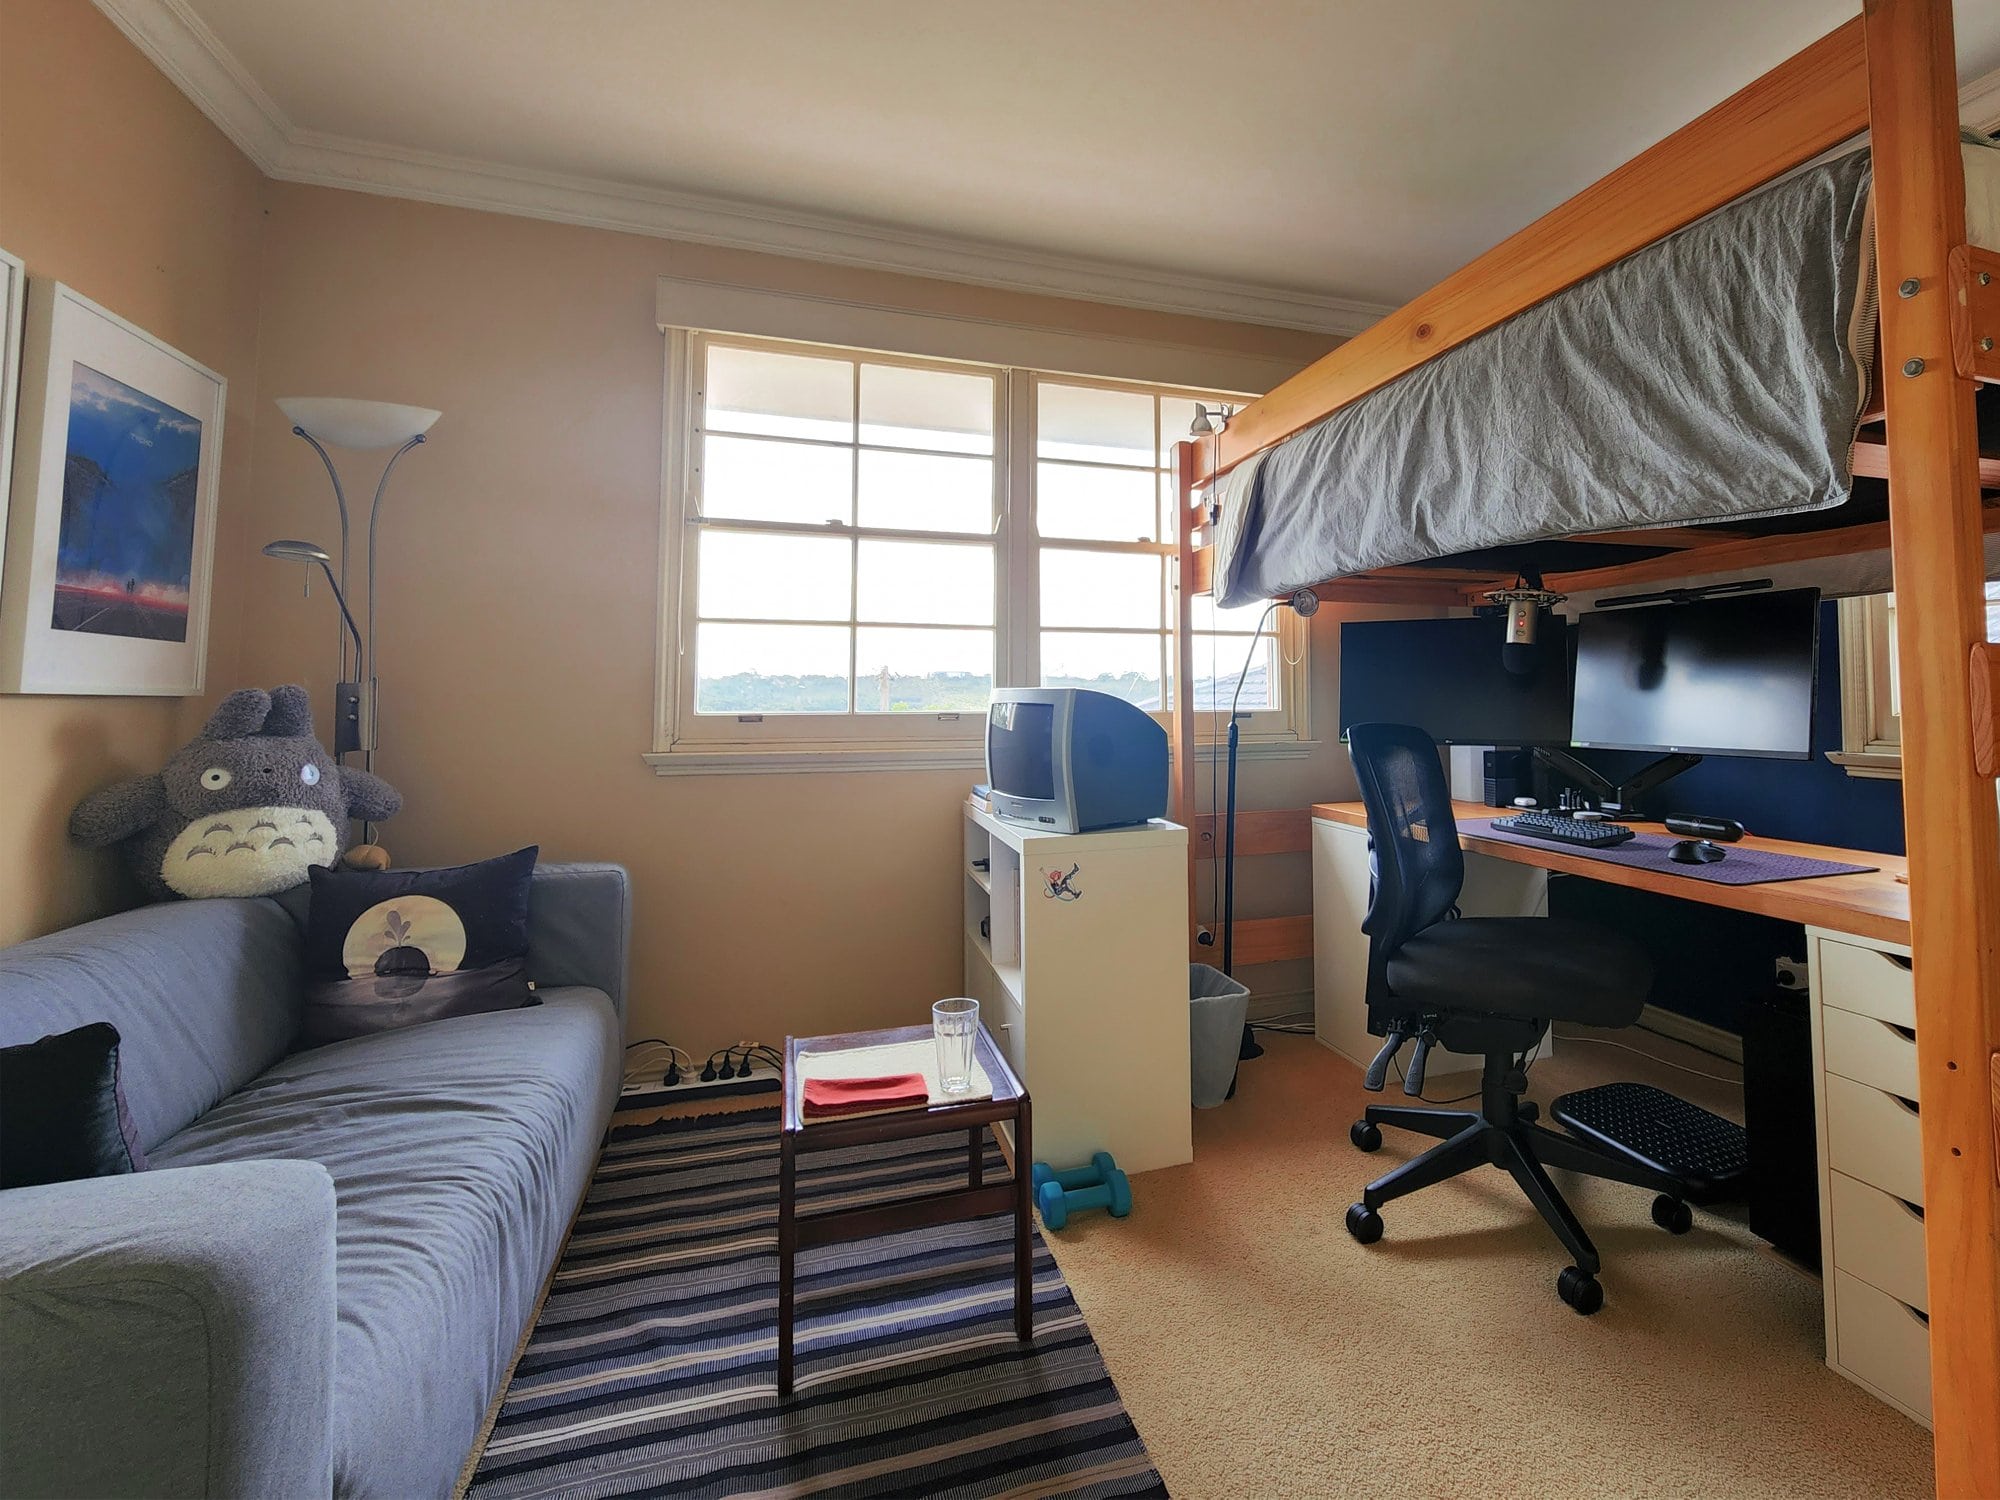 A cozy room with a loft bed above a workspace, which includes a desk with a computer setup and an ergonomic office chair. To the left, there’s a couch with a large plush toy and a small side table with a glass and a book. The room has a window, striped rug, and a standing lamp